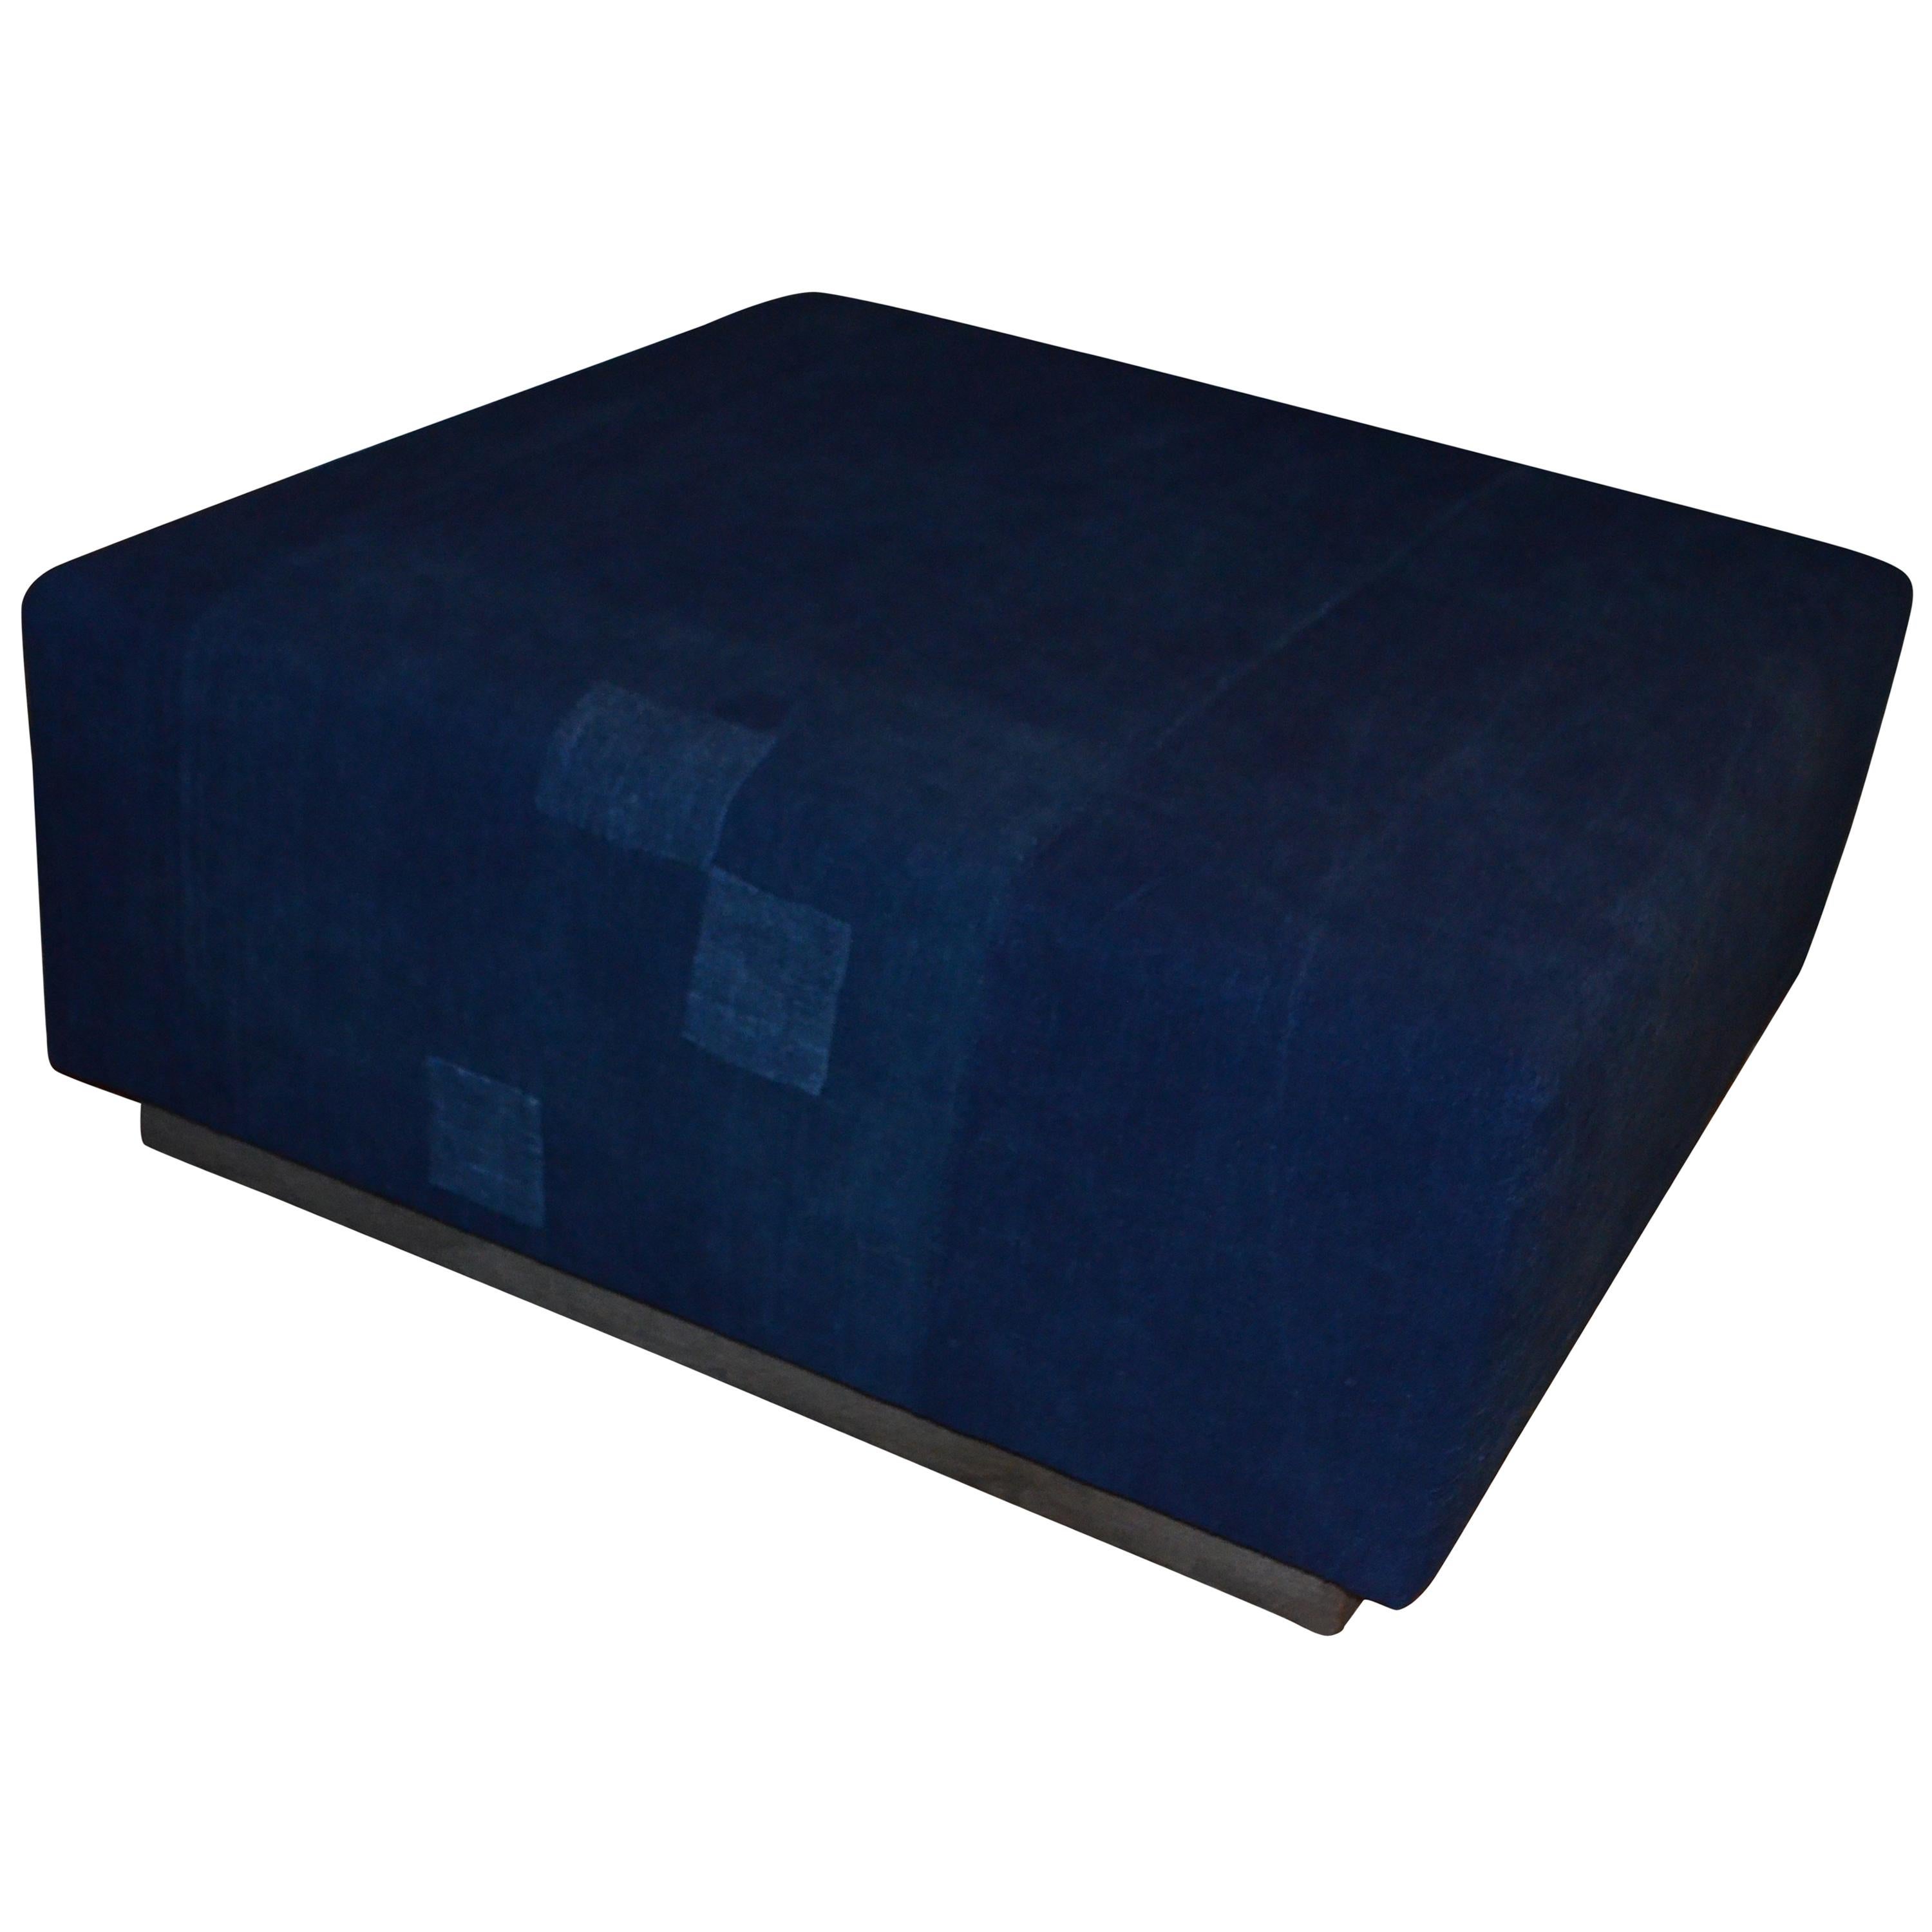 Ottoman Coffee Table Upholstered in Linen Dyed Indigo, France, circa 1860 For Sale